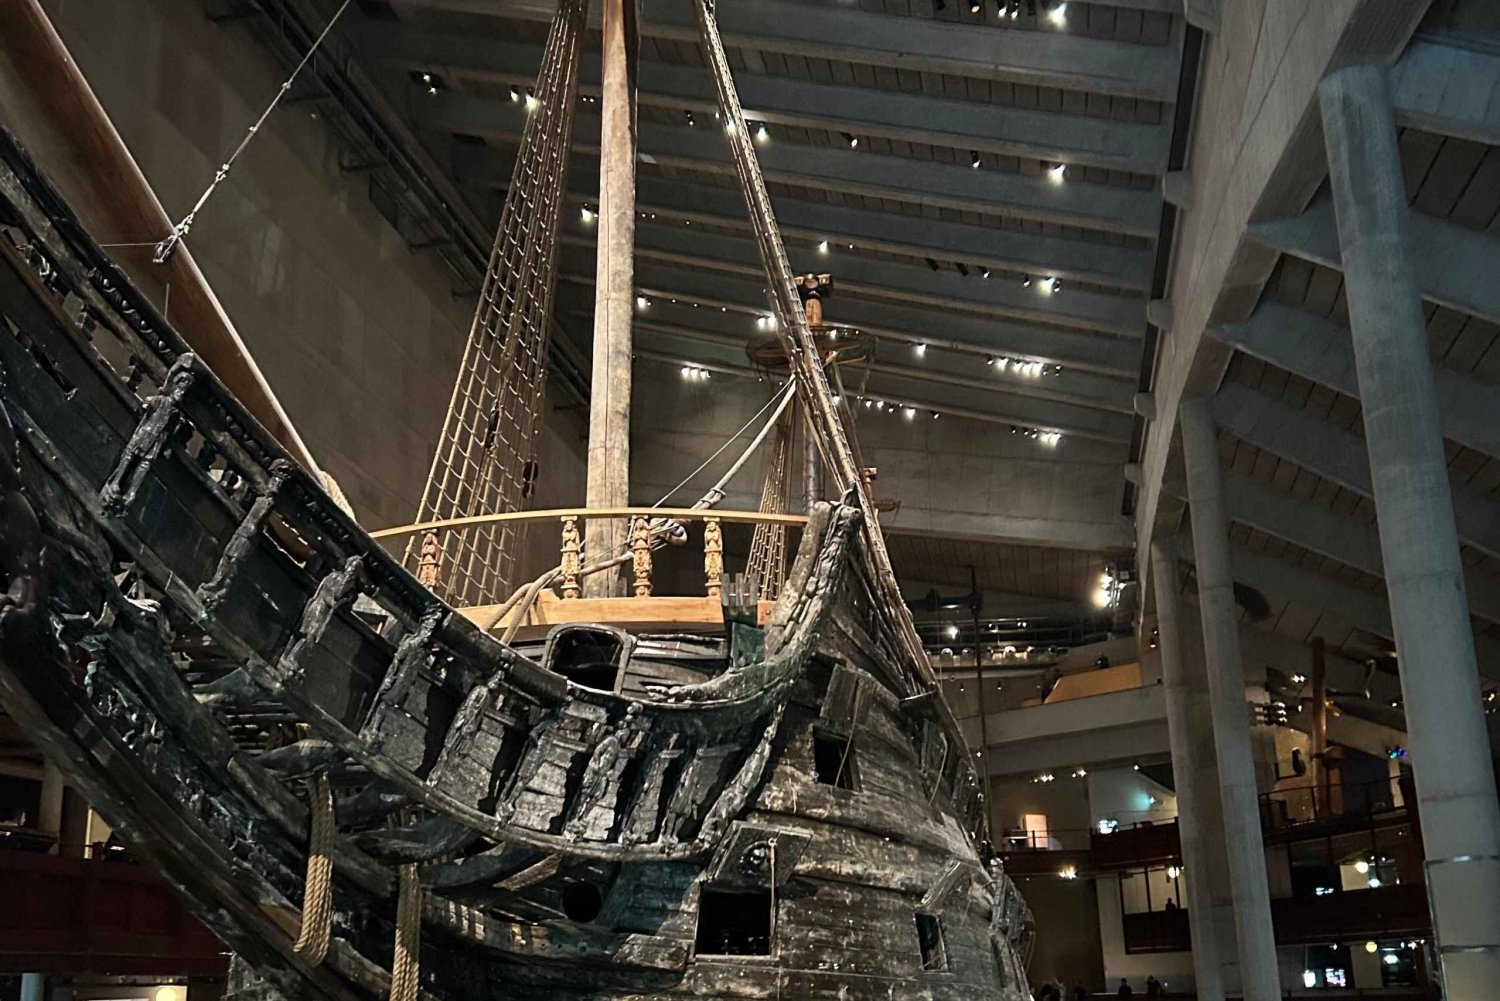 Stockholm: Vasa Museum Guided Tour, Including Entry Ticket